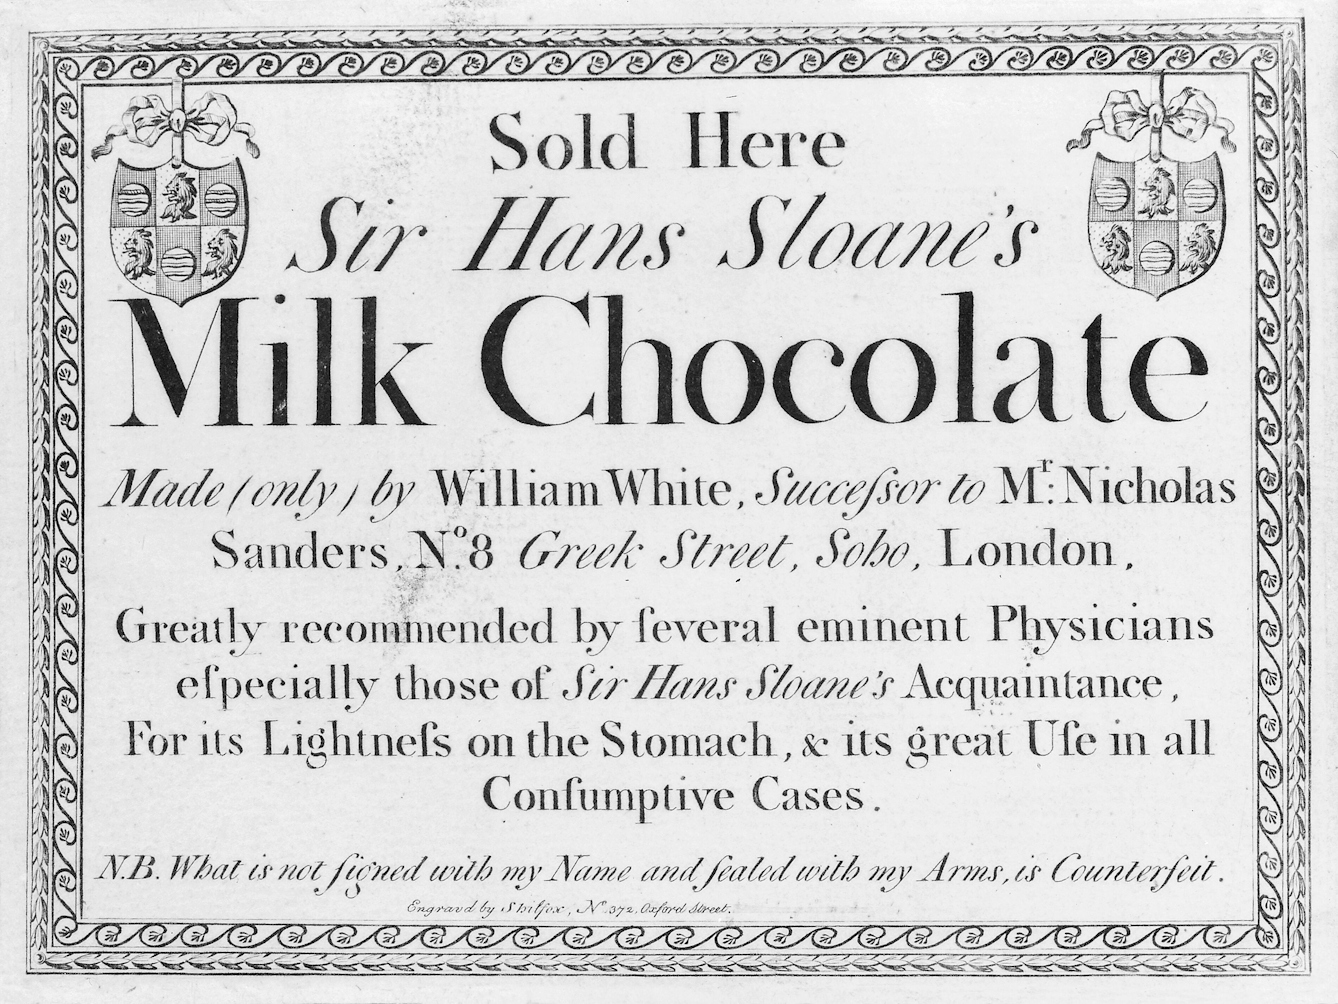 Black and white trade-card for 'Sir Hans Sloane's Milk Chocolate', with an ornate border, crests at the two top corners, and text reading "Greatly recommended by several eminent physicians especially those of Sir Hans Sloane's acquaintance, for its lightness on the stomach & it's great use in all consumptive cases.